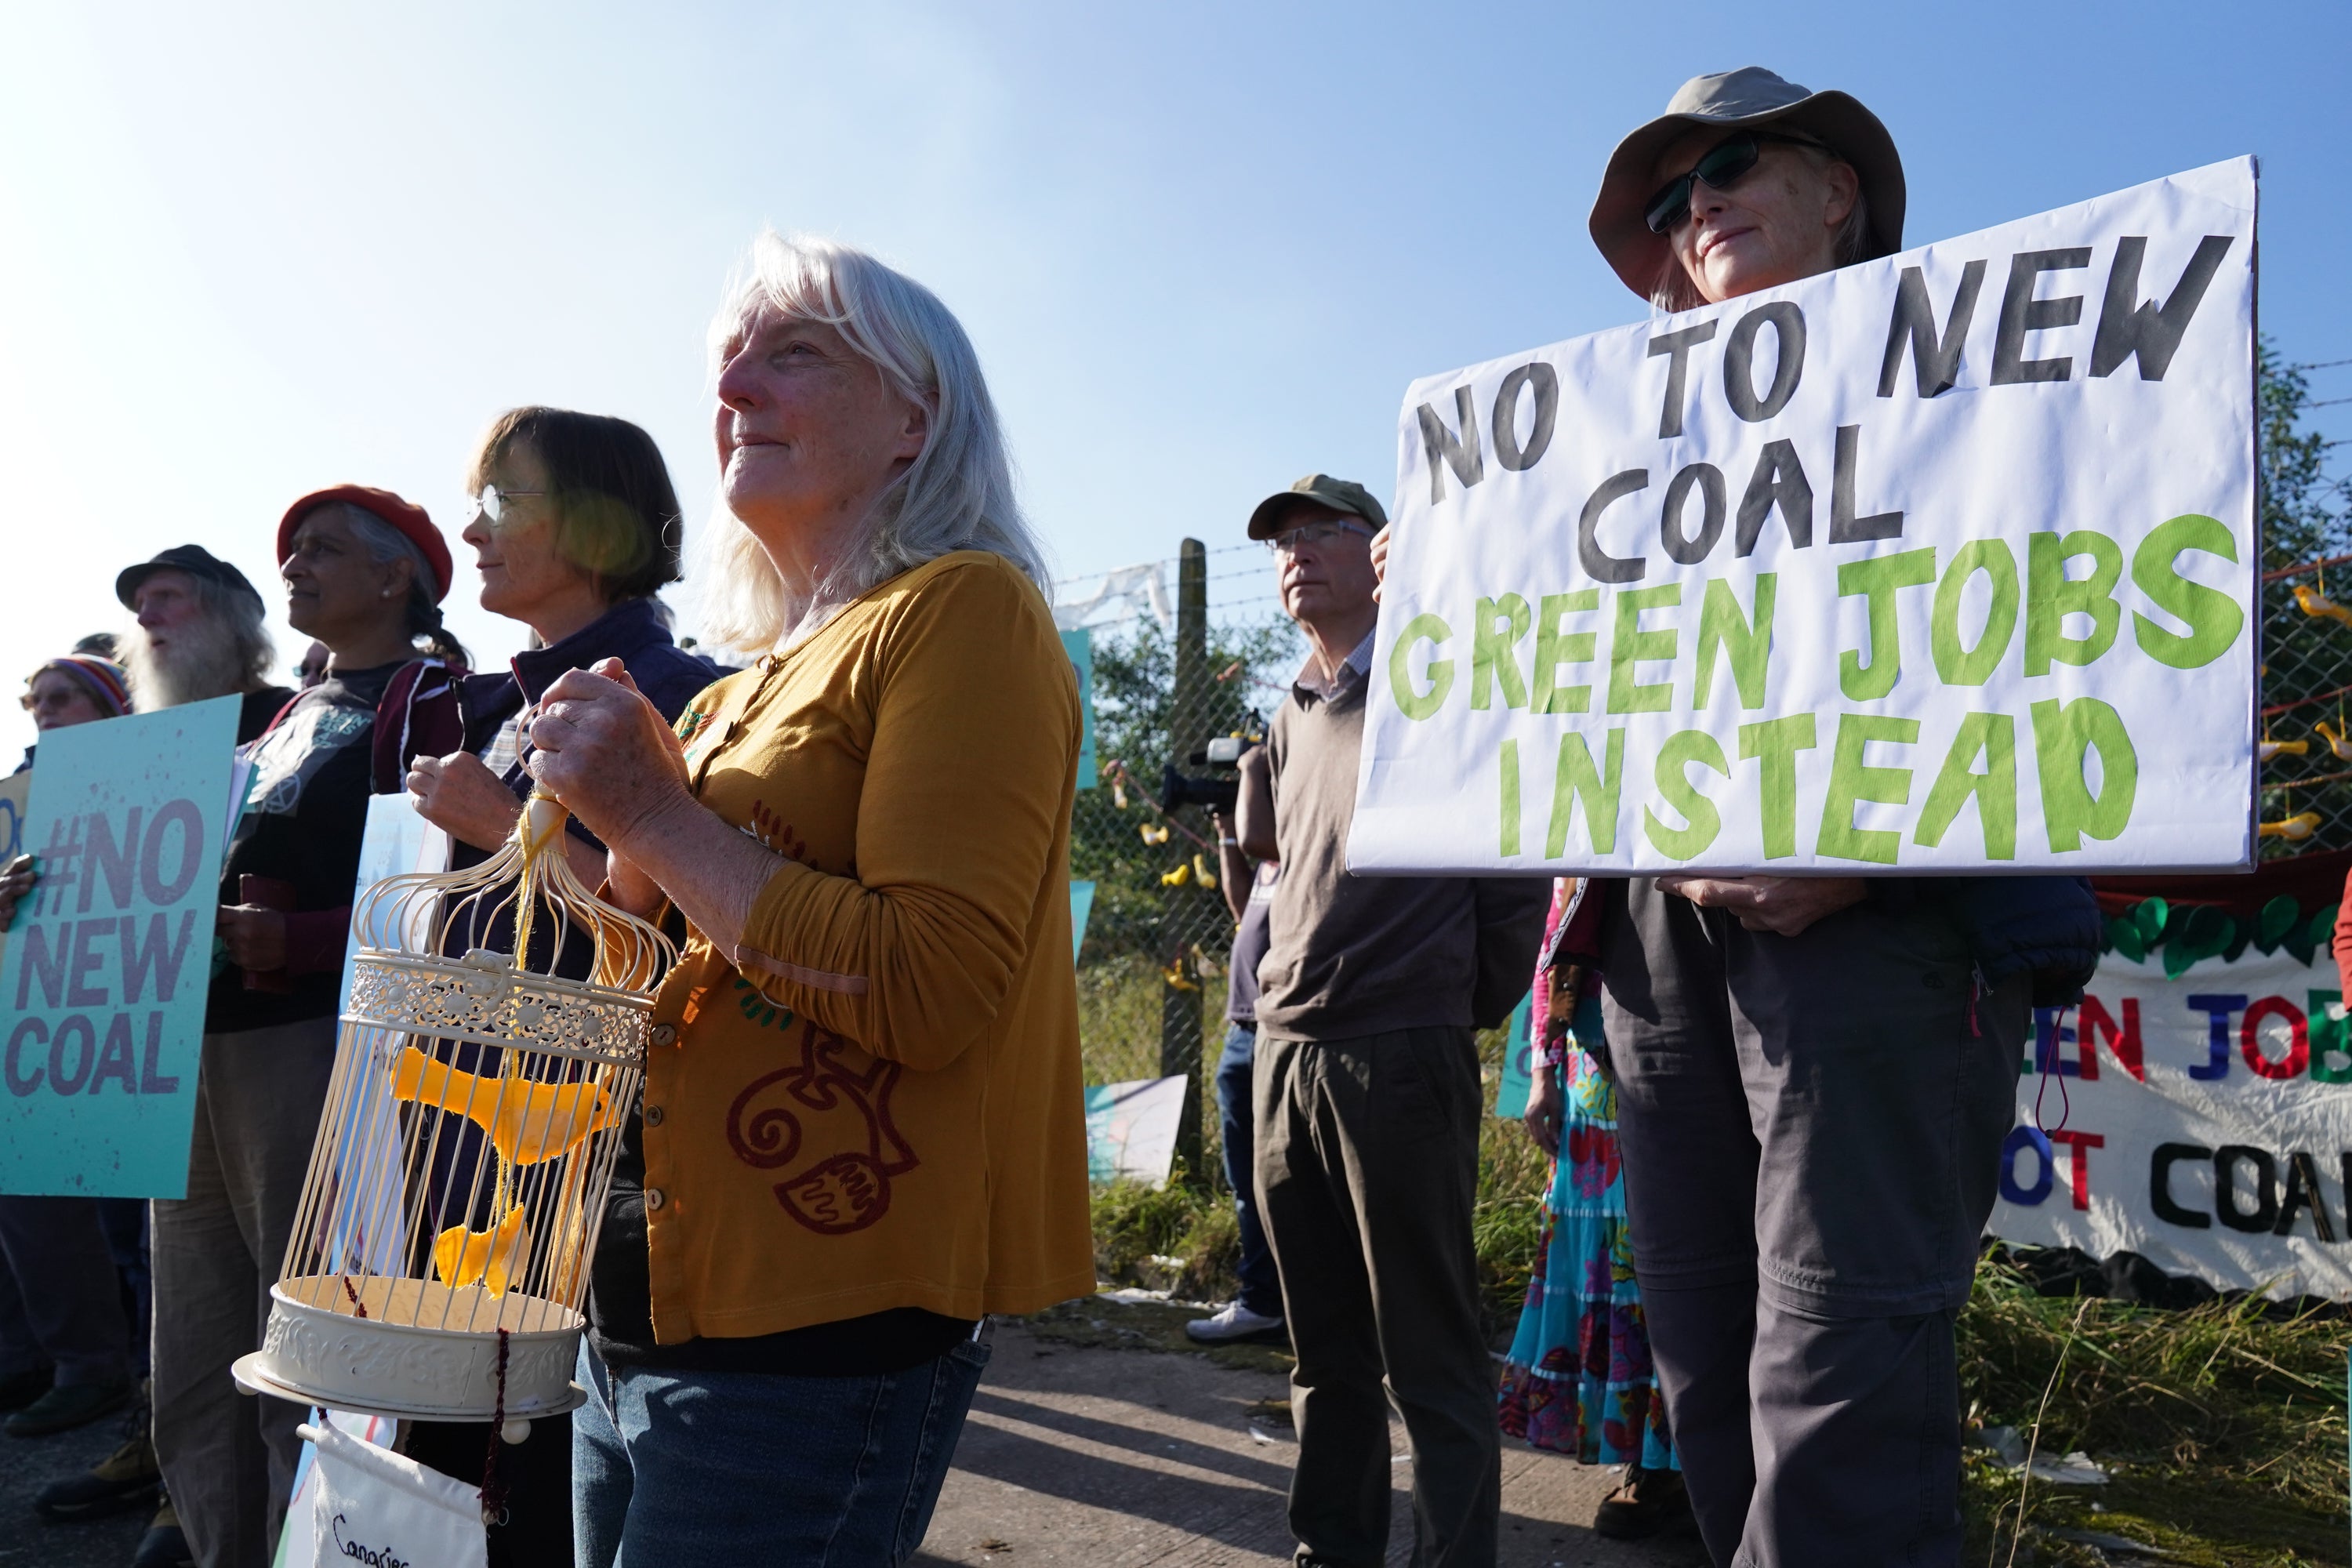 Demonstrators outside the proposed Woodhouse Colliery, south of Whitehaven, ahead of a public inquiry into the plans for a new deep coal mine on the Cumbrian coast (Owen Humphreys/PA)